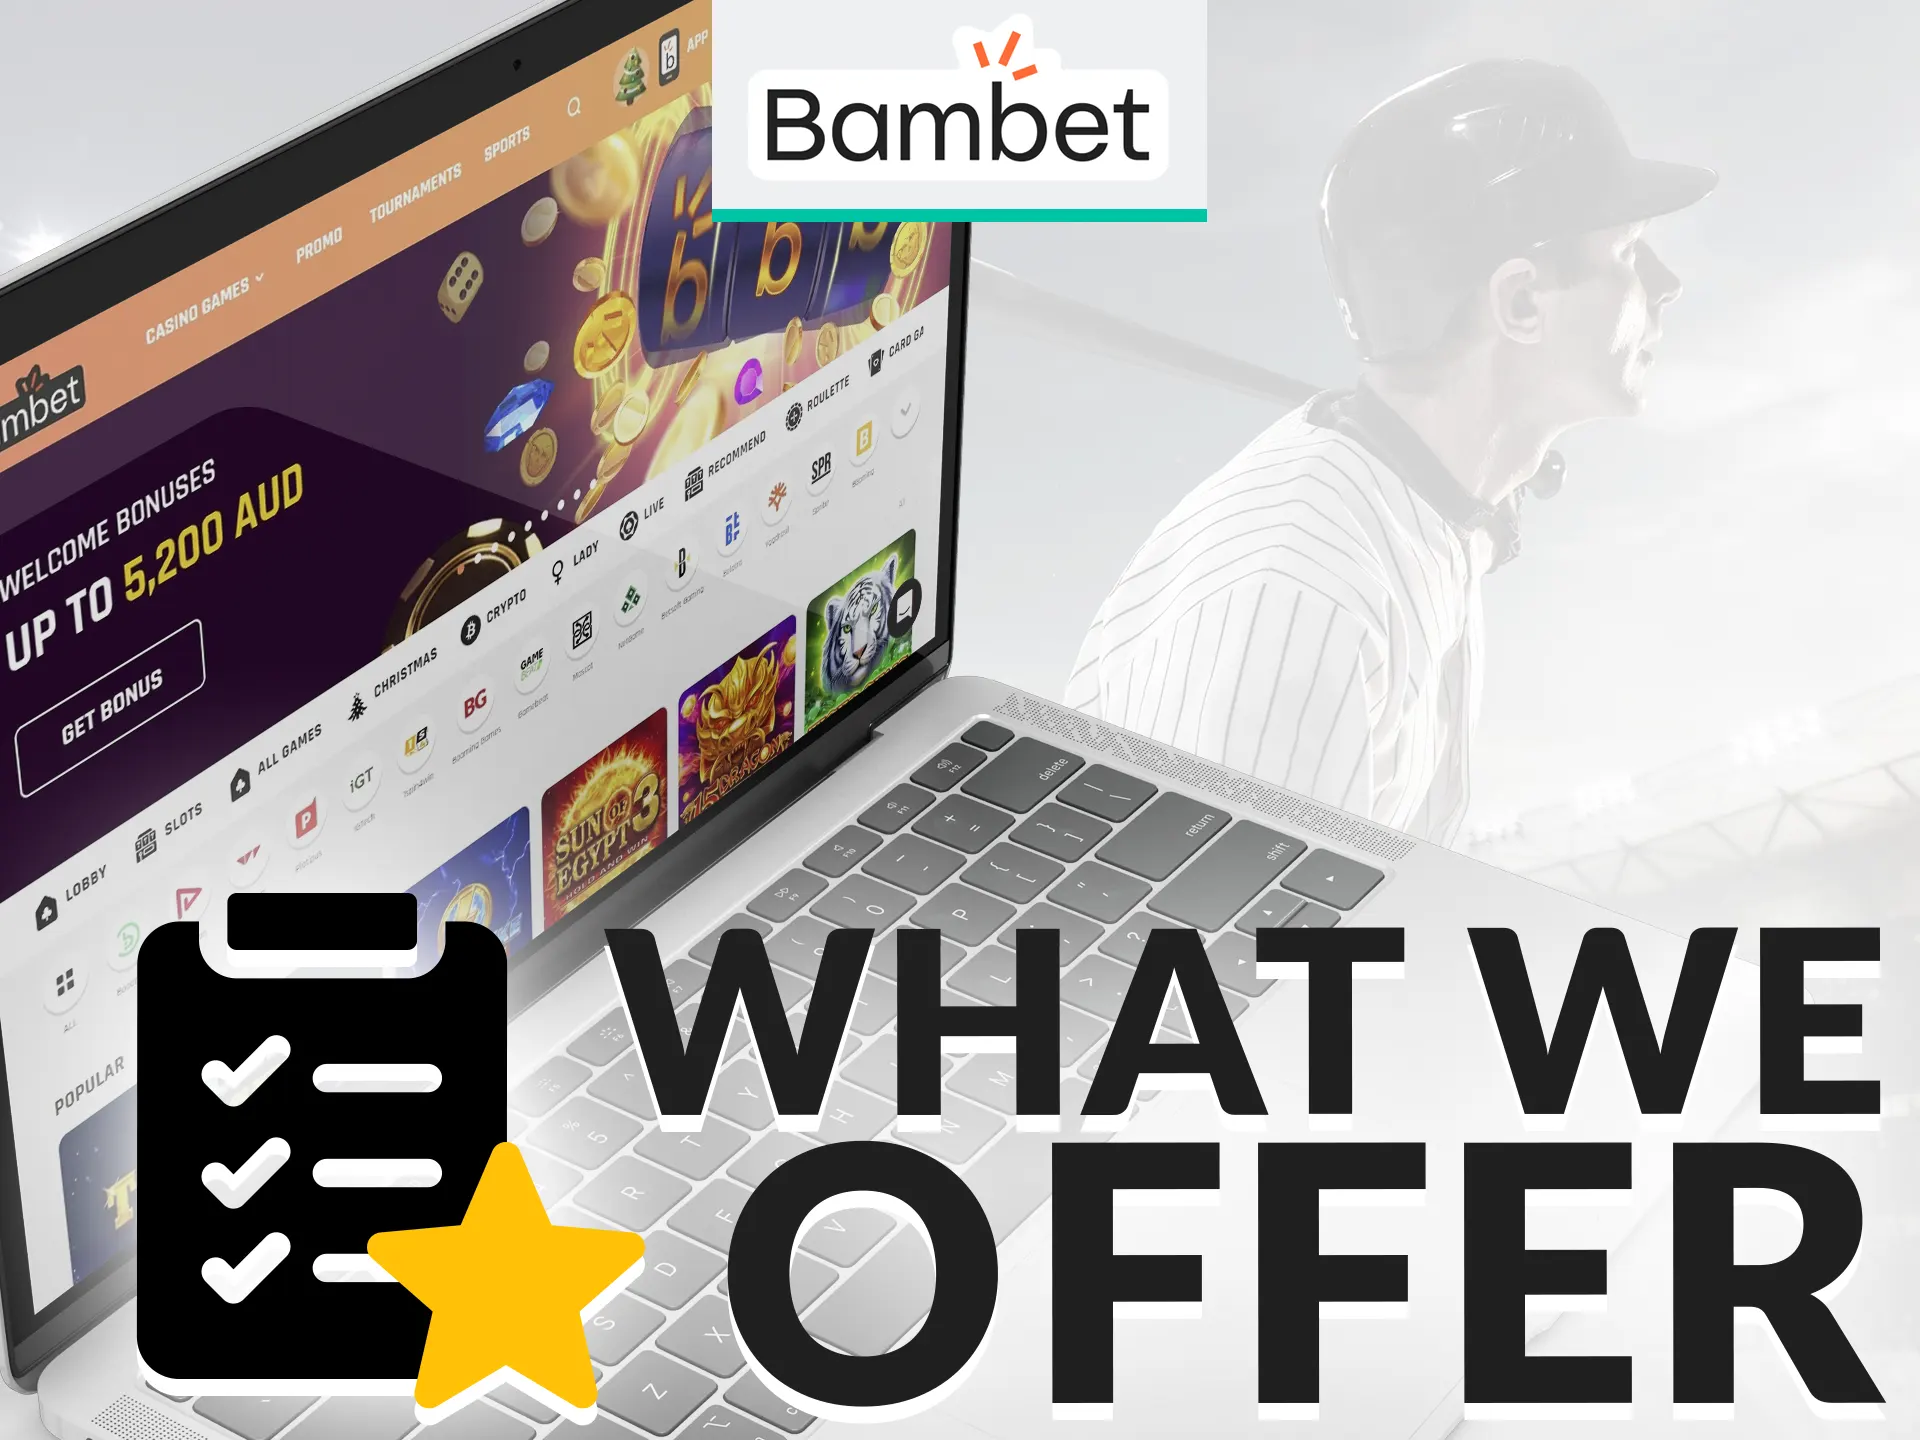 Check the Bambet advantages out of other online betting and gambling websites.